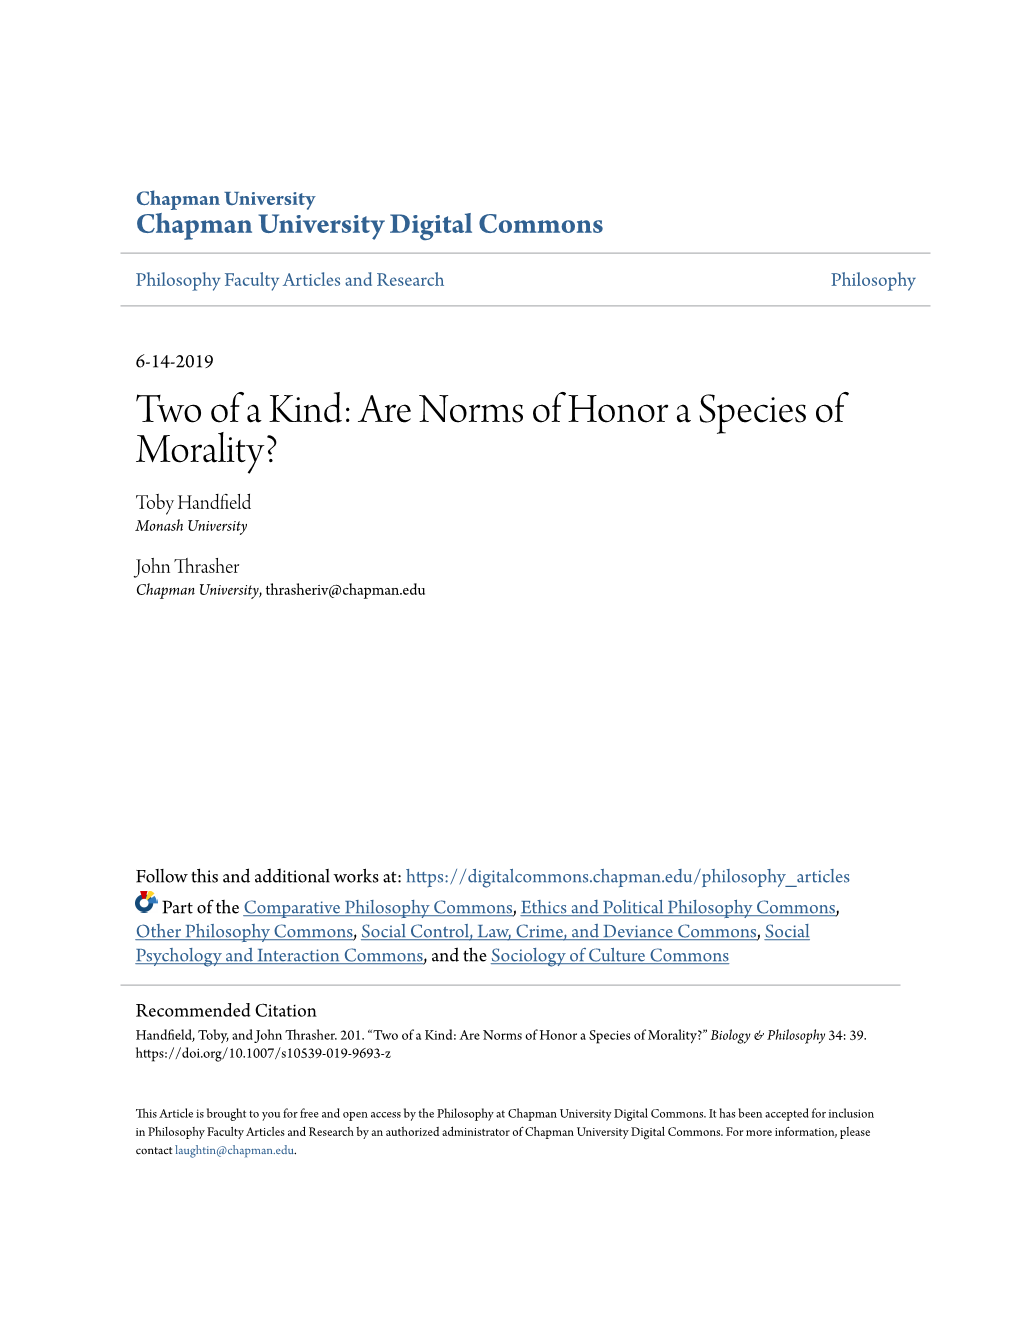 Two of a Kind: Are Norms of Honor a Species of Morality? Toby Handfield Monash University